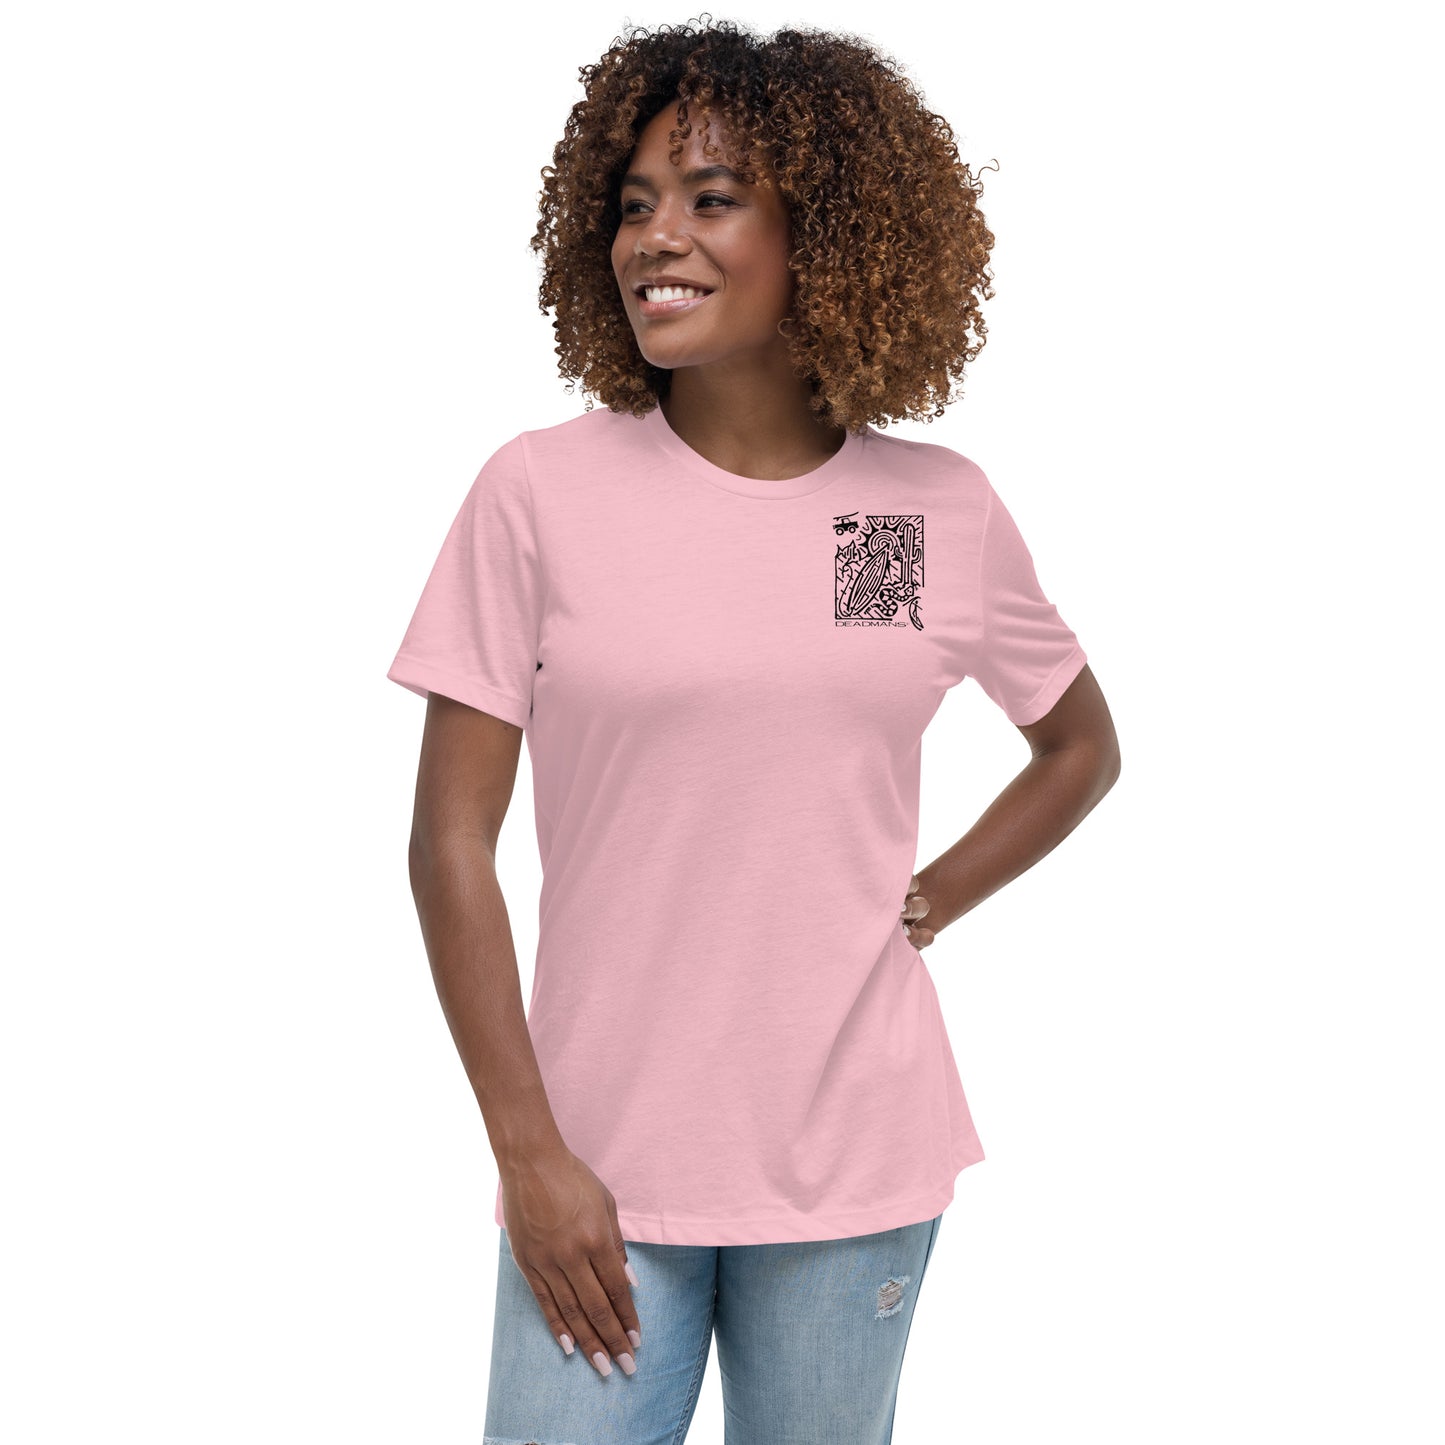 Women's Relaxed T-Shirt - Pray for Surf